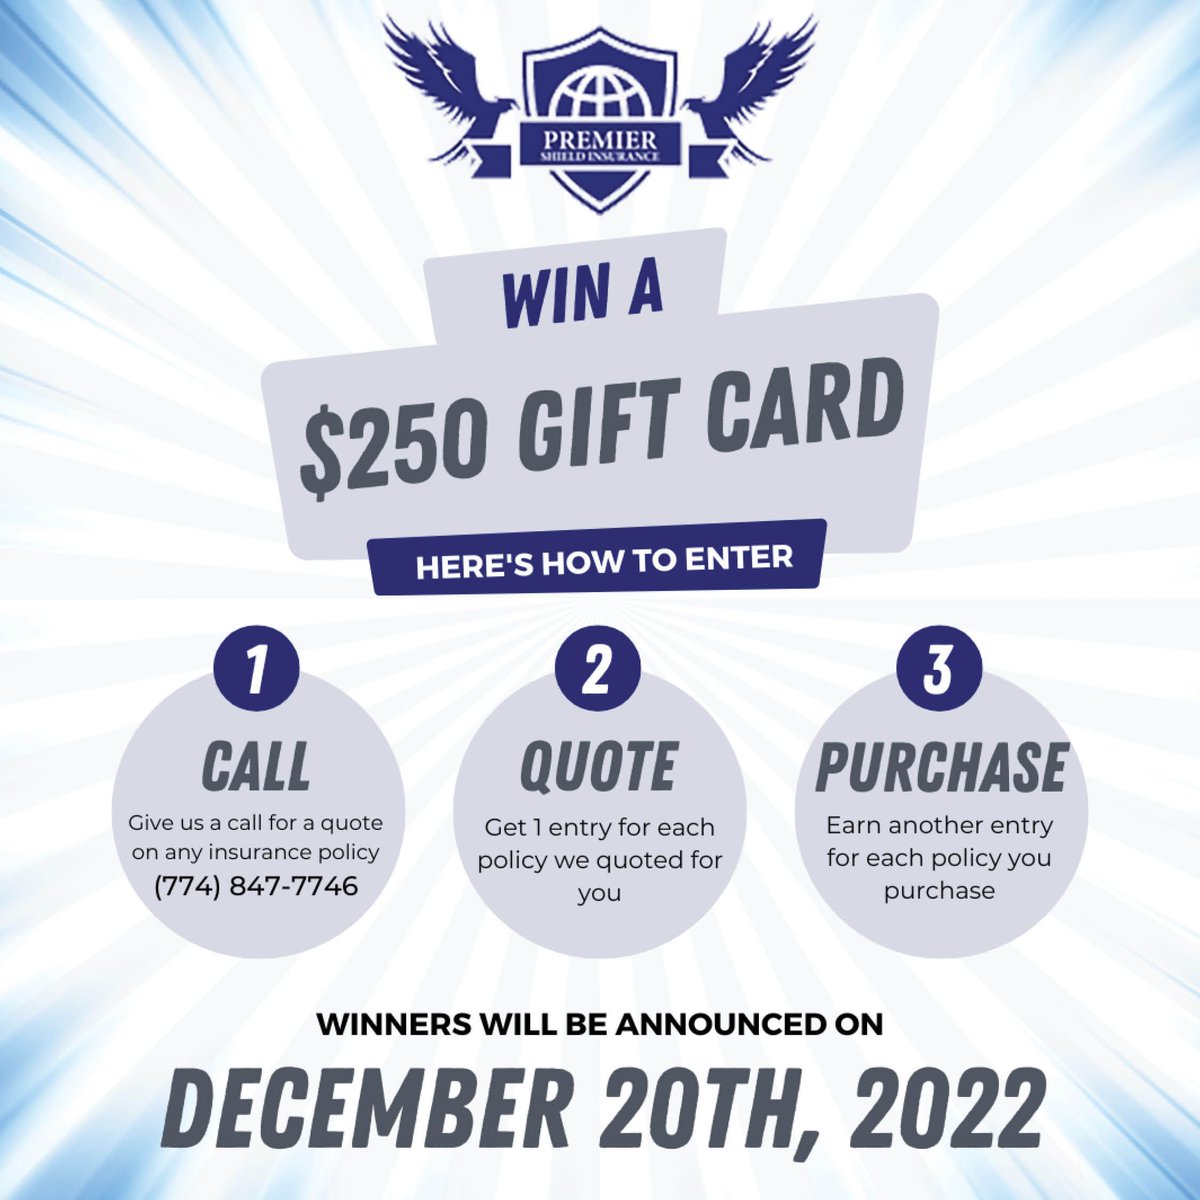 We're giving away two $250 Amazon Gift Cards!

Want to enter to win? Call for a quote on any insurance policy by 12/16.
☎️ (774) 847-7746 
Winners will be announced on 12/20.

To get in touch, visit:
premiershieldinsurance.net/personal-insur…
#premiershield #newengland #giveaway #giftcardgiveaway